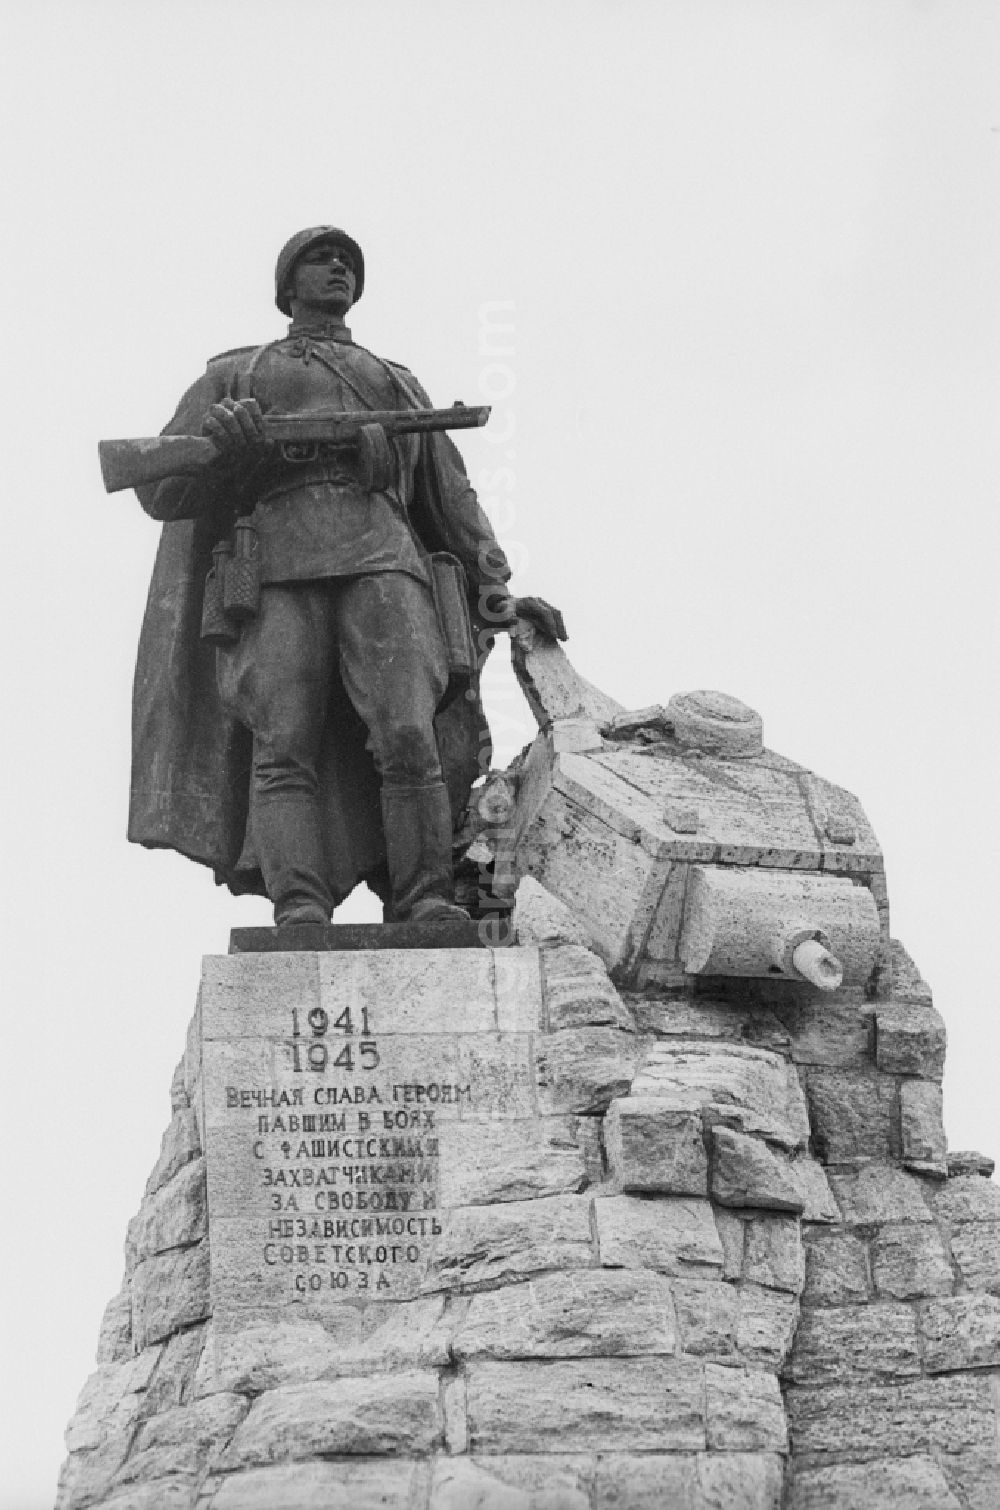 GDR photo archive: Seelow - Monument to the fallen russian soldiers by Lew Kerbel, at the Memorial Seelow Heights in Seelow, in the present state of Brandenburg. The bronze figure depicts a Red Army soldier with a submachine gun, standing next to the tower of a destroyed German tank